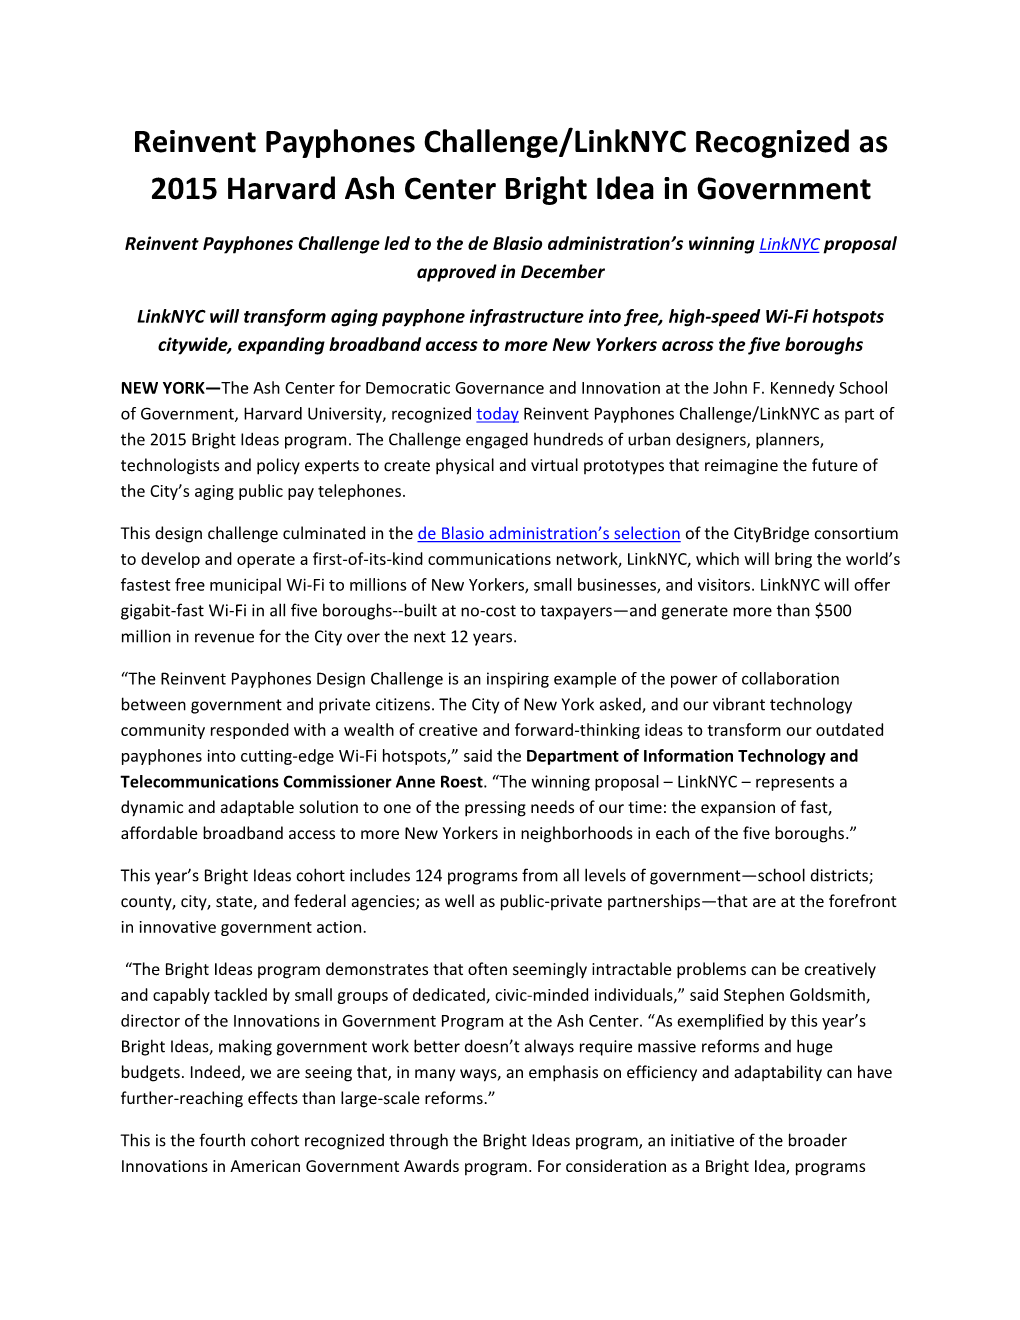 Reinvent Payphones Challenge/Linknyc Recognized As 2015 Harvard Ash Center Bright Idea in Government